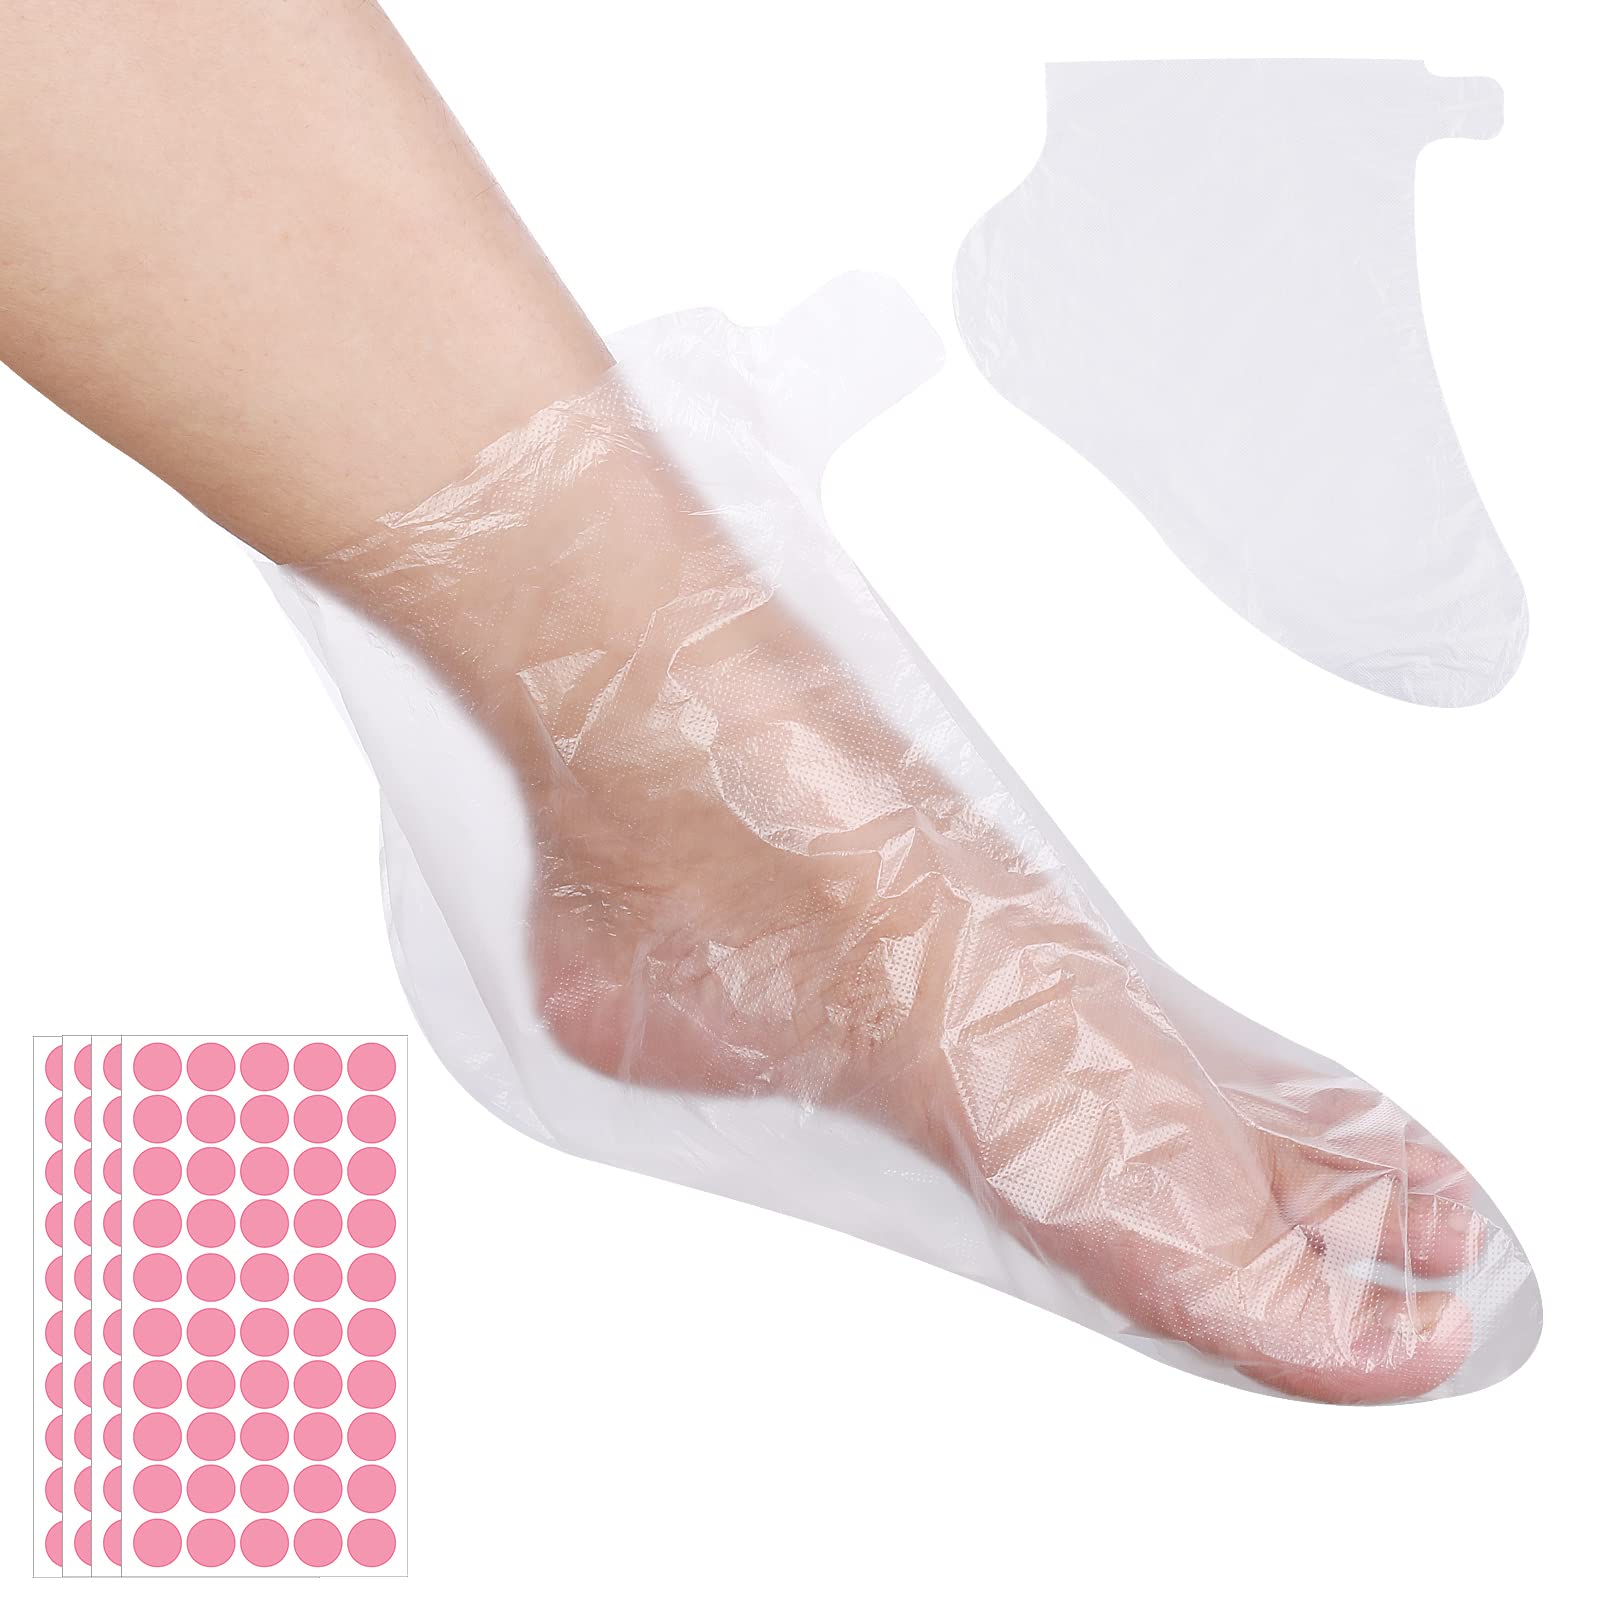 200pcs Paraffin Wax Bath Liners, Toyar Plastic Paraffin Bags for Hand &  Foot, Plastic Paraffin Baths Socks and Gloves for Therabath Wax Treatment.